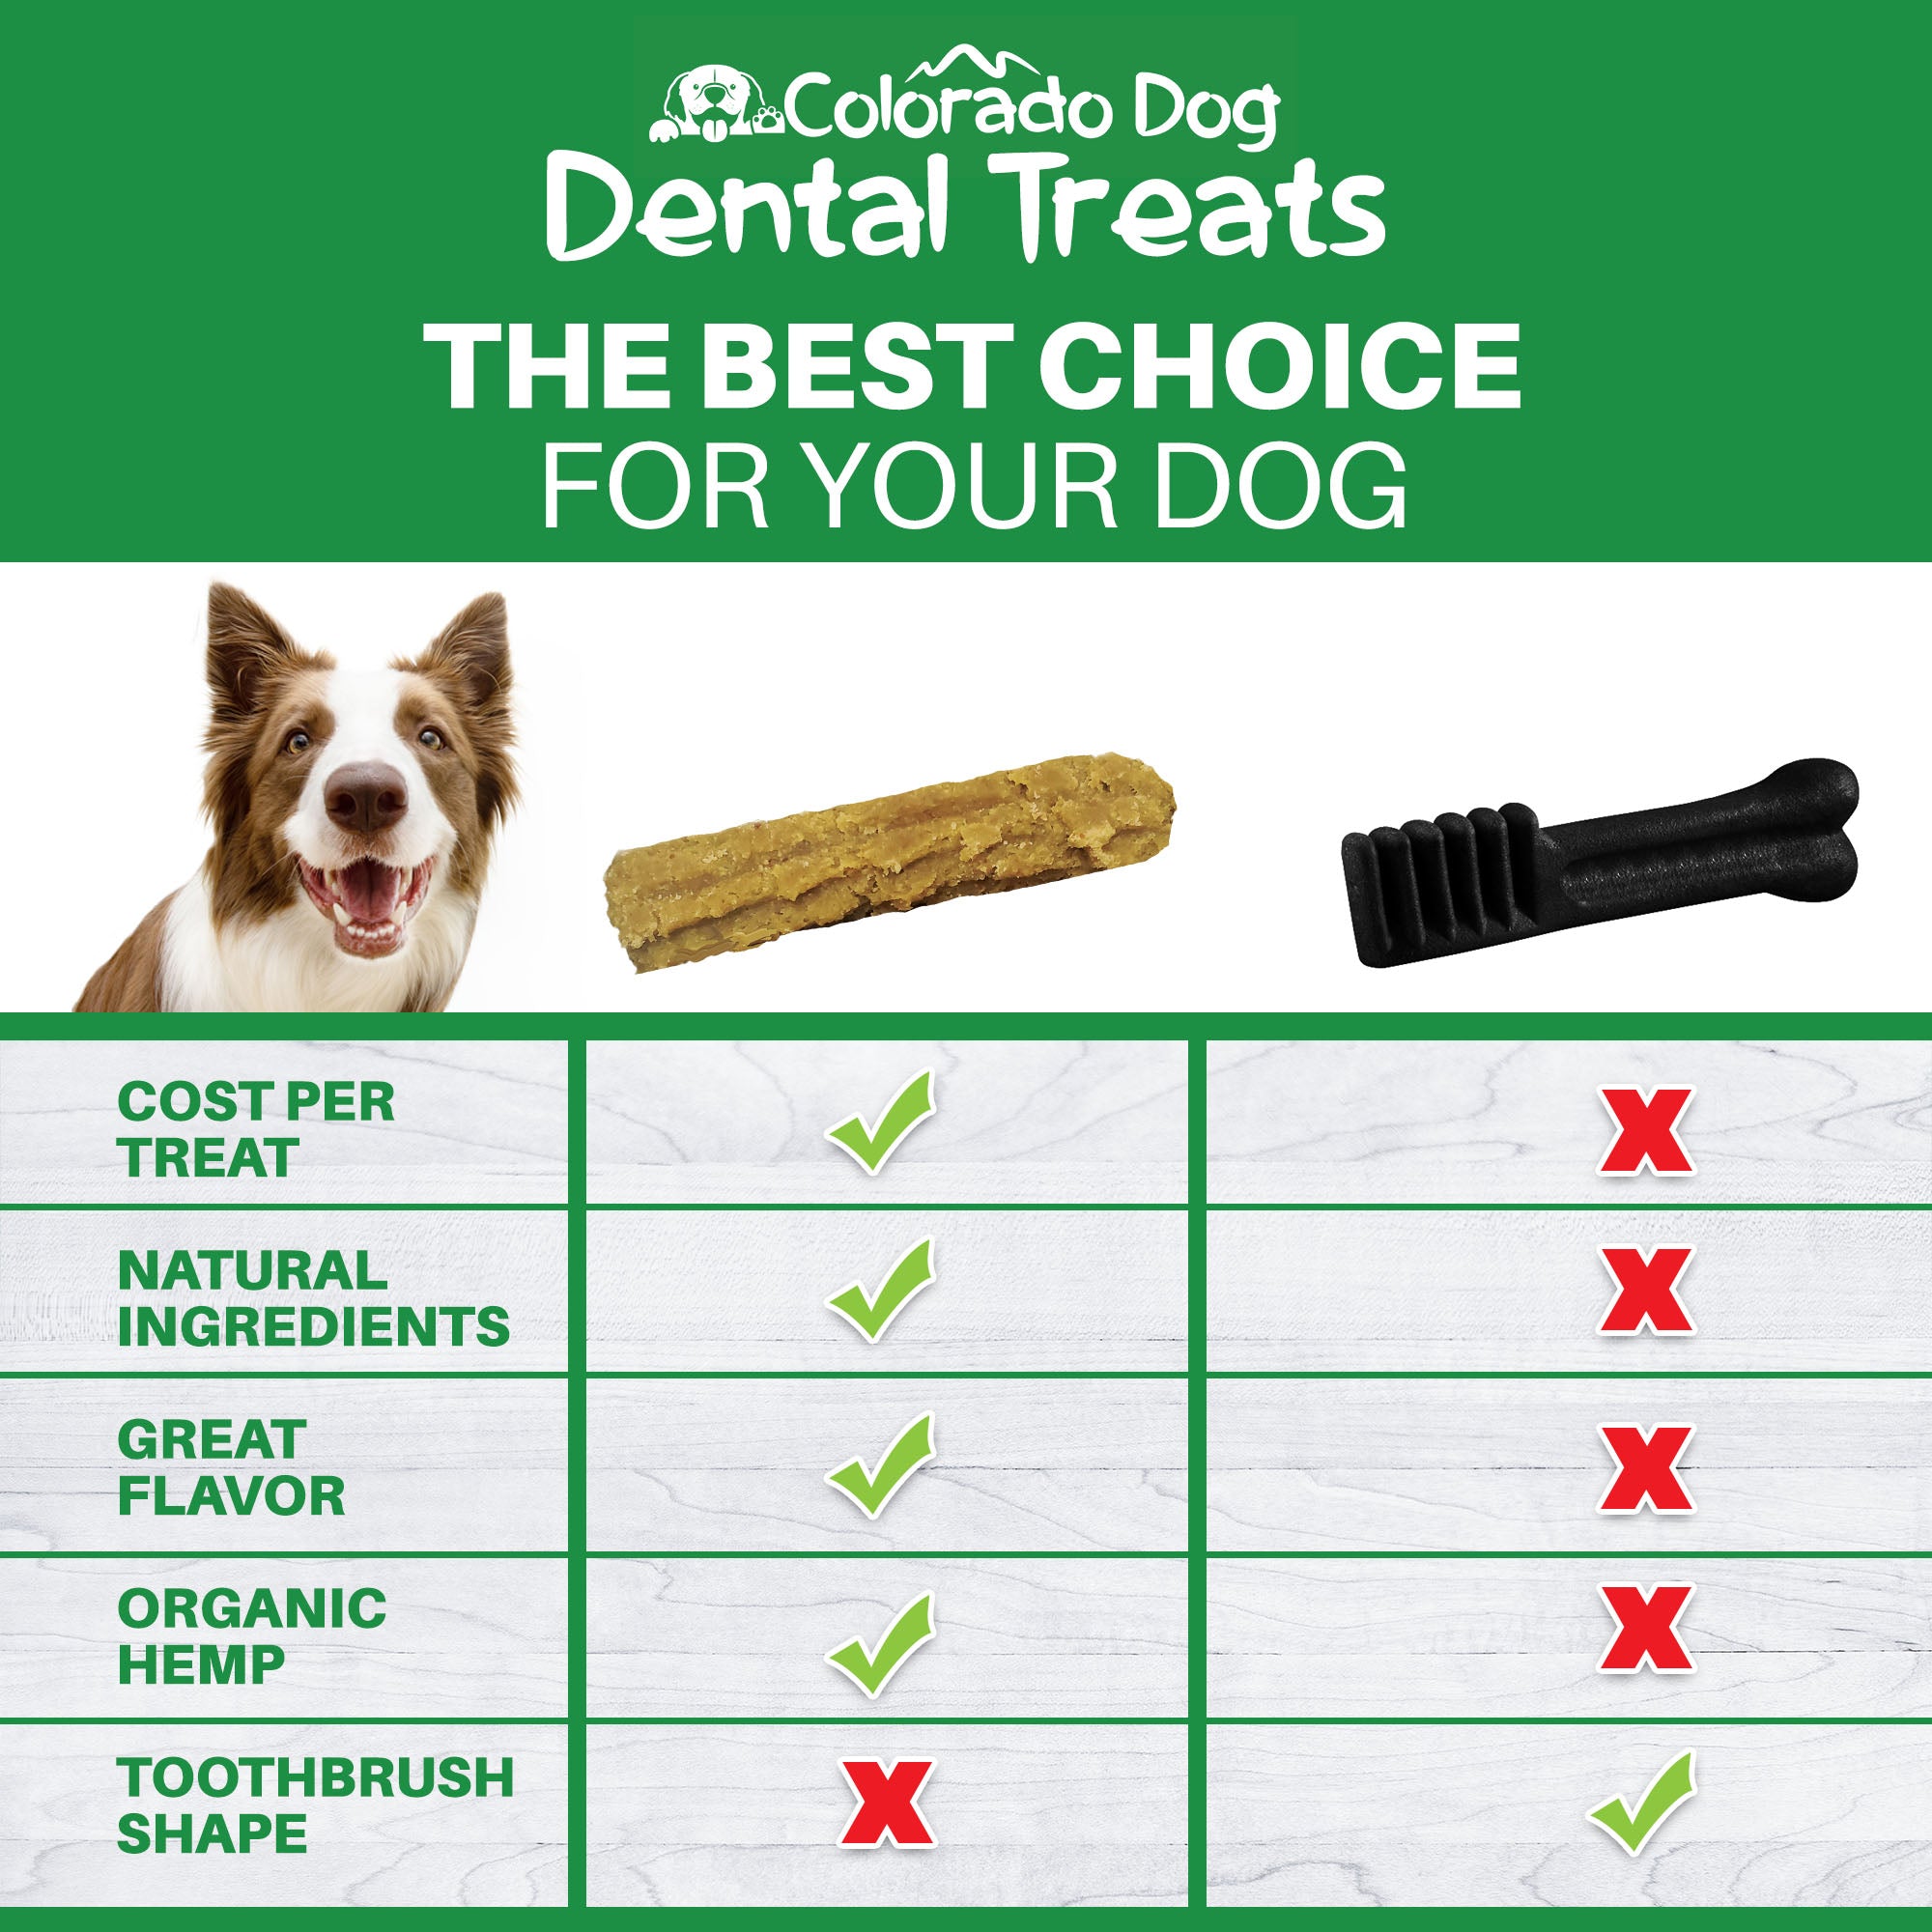 Colorado Dog Dental Dog Treats - with Coconut Oil, Spirulina and Hemp – Compare Ingredients & Cost – a 100% Natural, Effective Dog Dental Chew, Not a Fake Dog Toothbrush